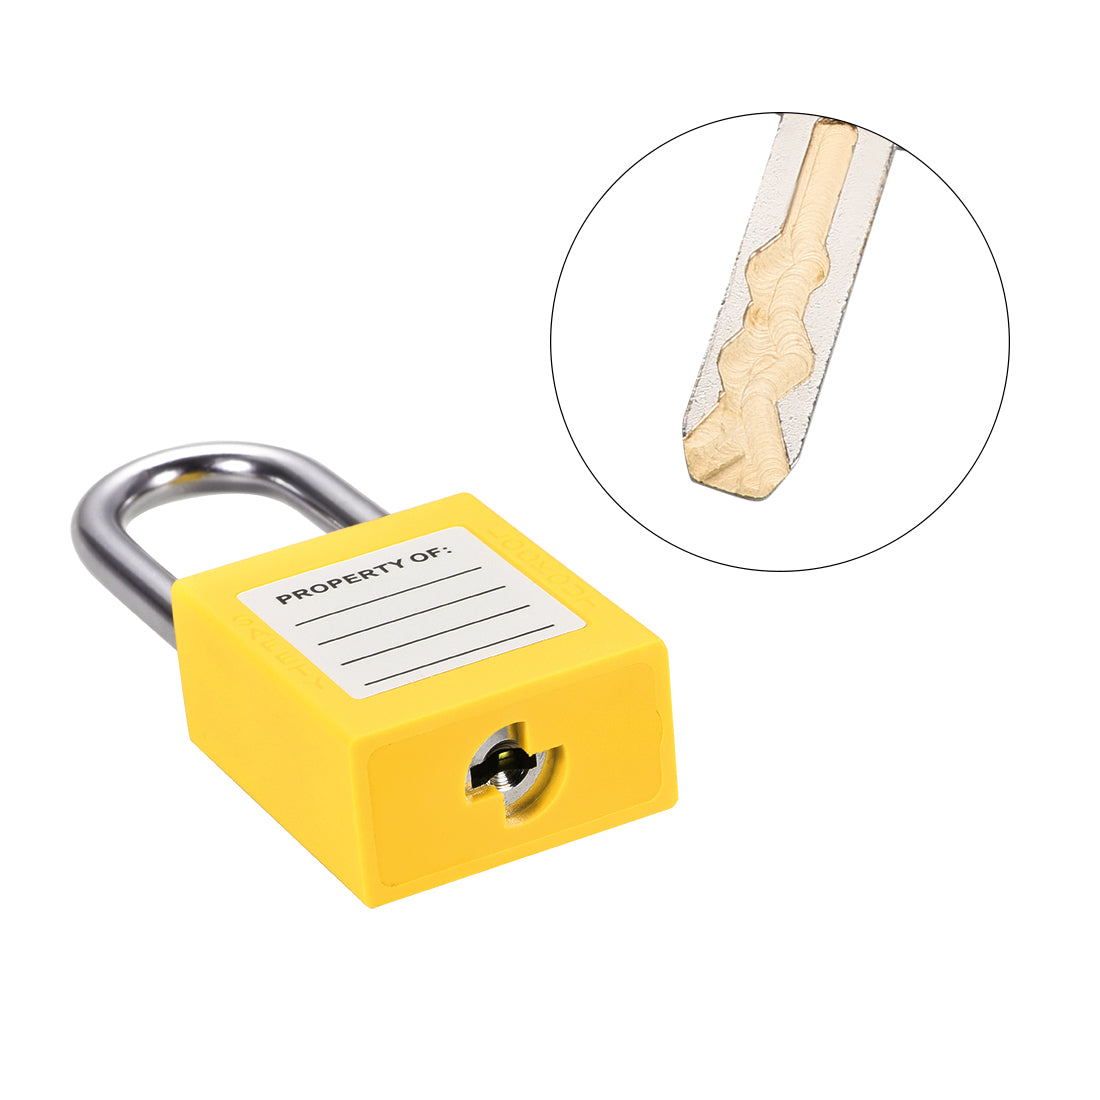 uxcell Uxcell Lockout Tagout Safety Padlock 38mm Steel Shackle Keyed Alike Yellow 2Pcs